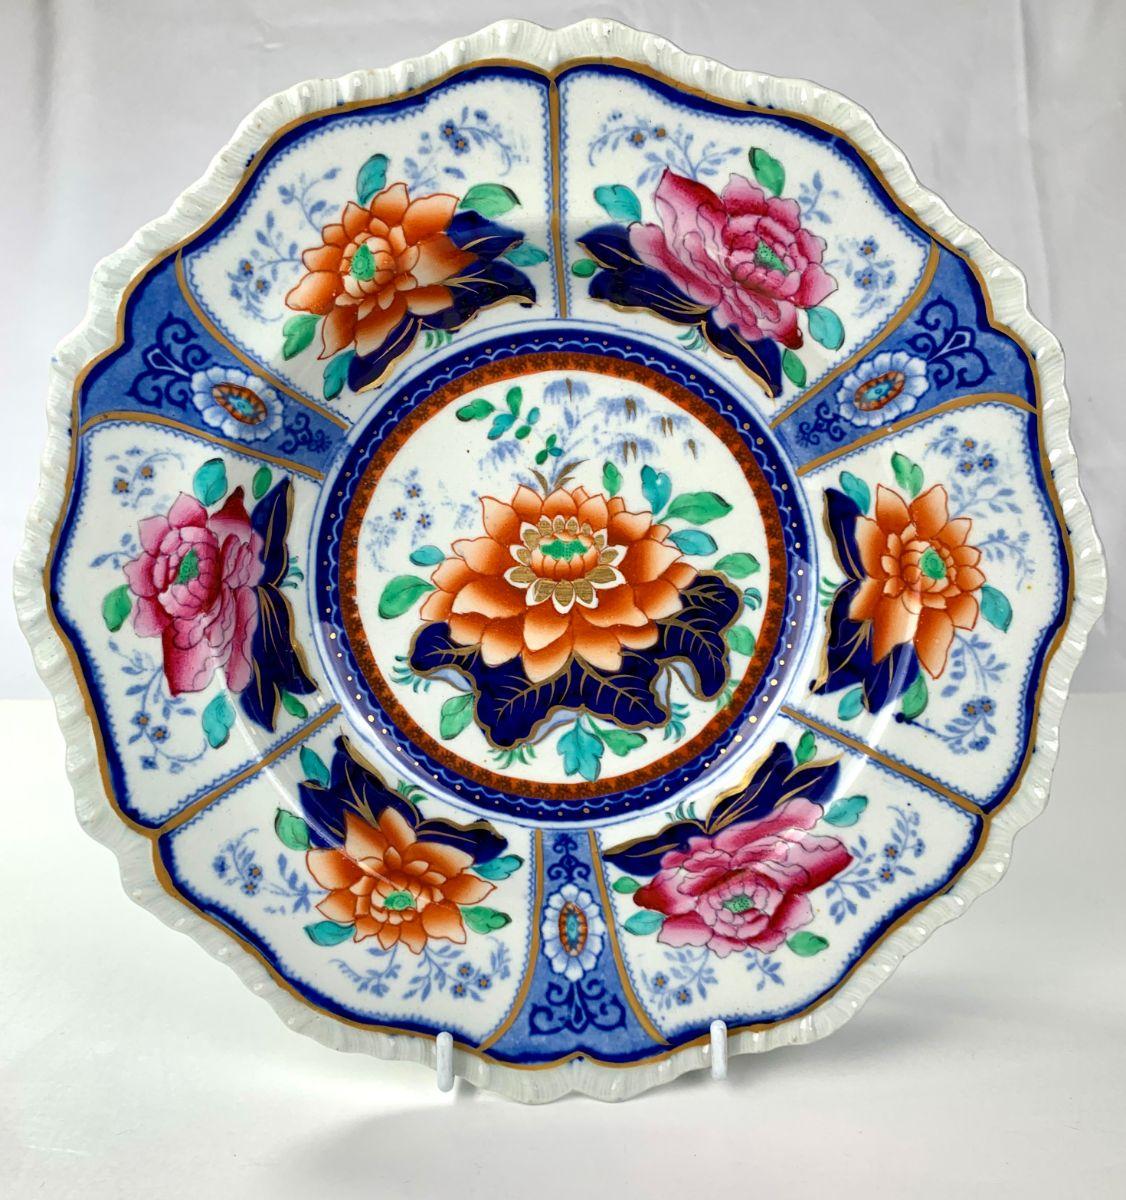 English Pair of Staffordshire Ironstone Dishes Made in England, Circa 1825